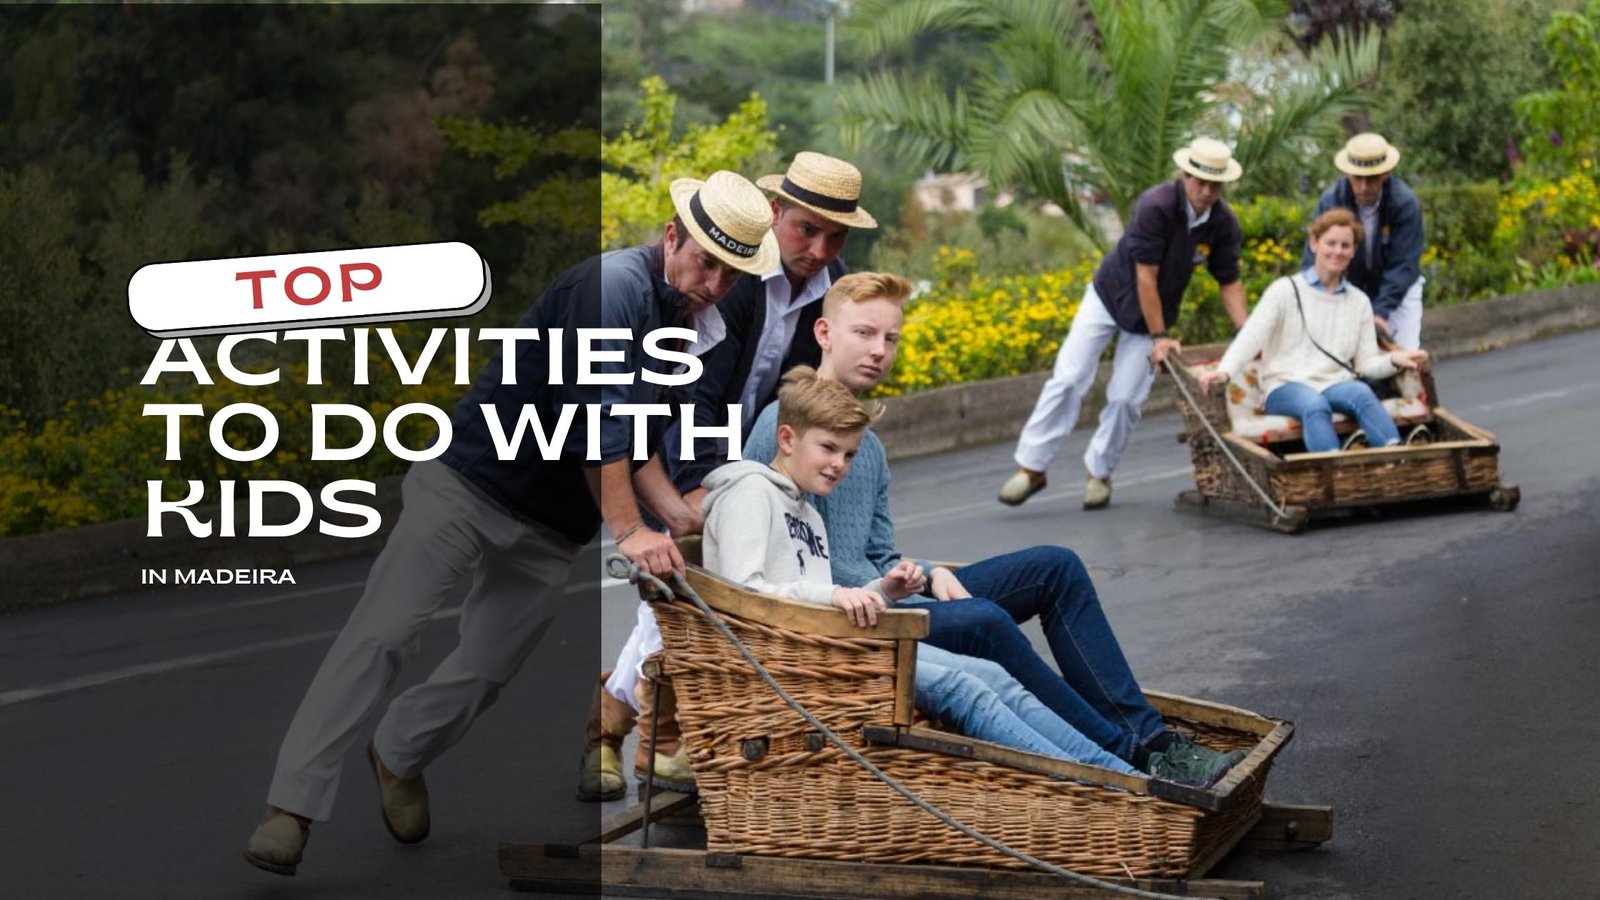 Top 12 Activities to do with Kids in Madeira